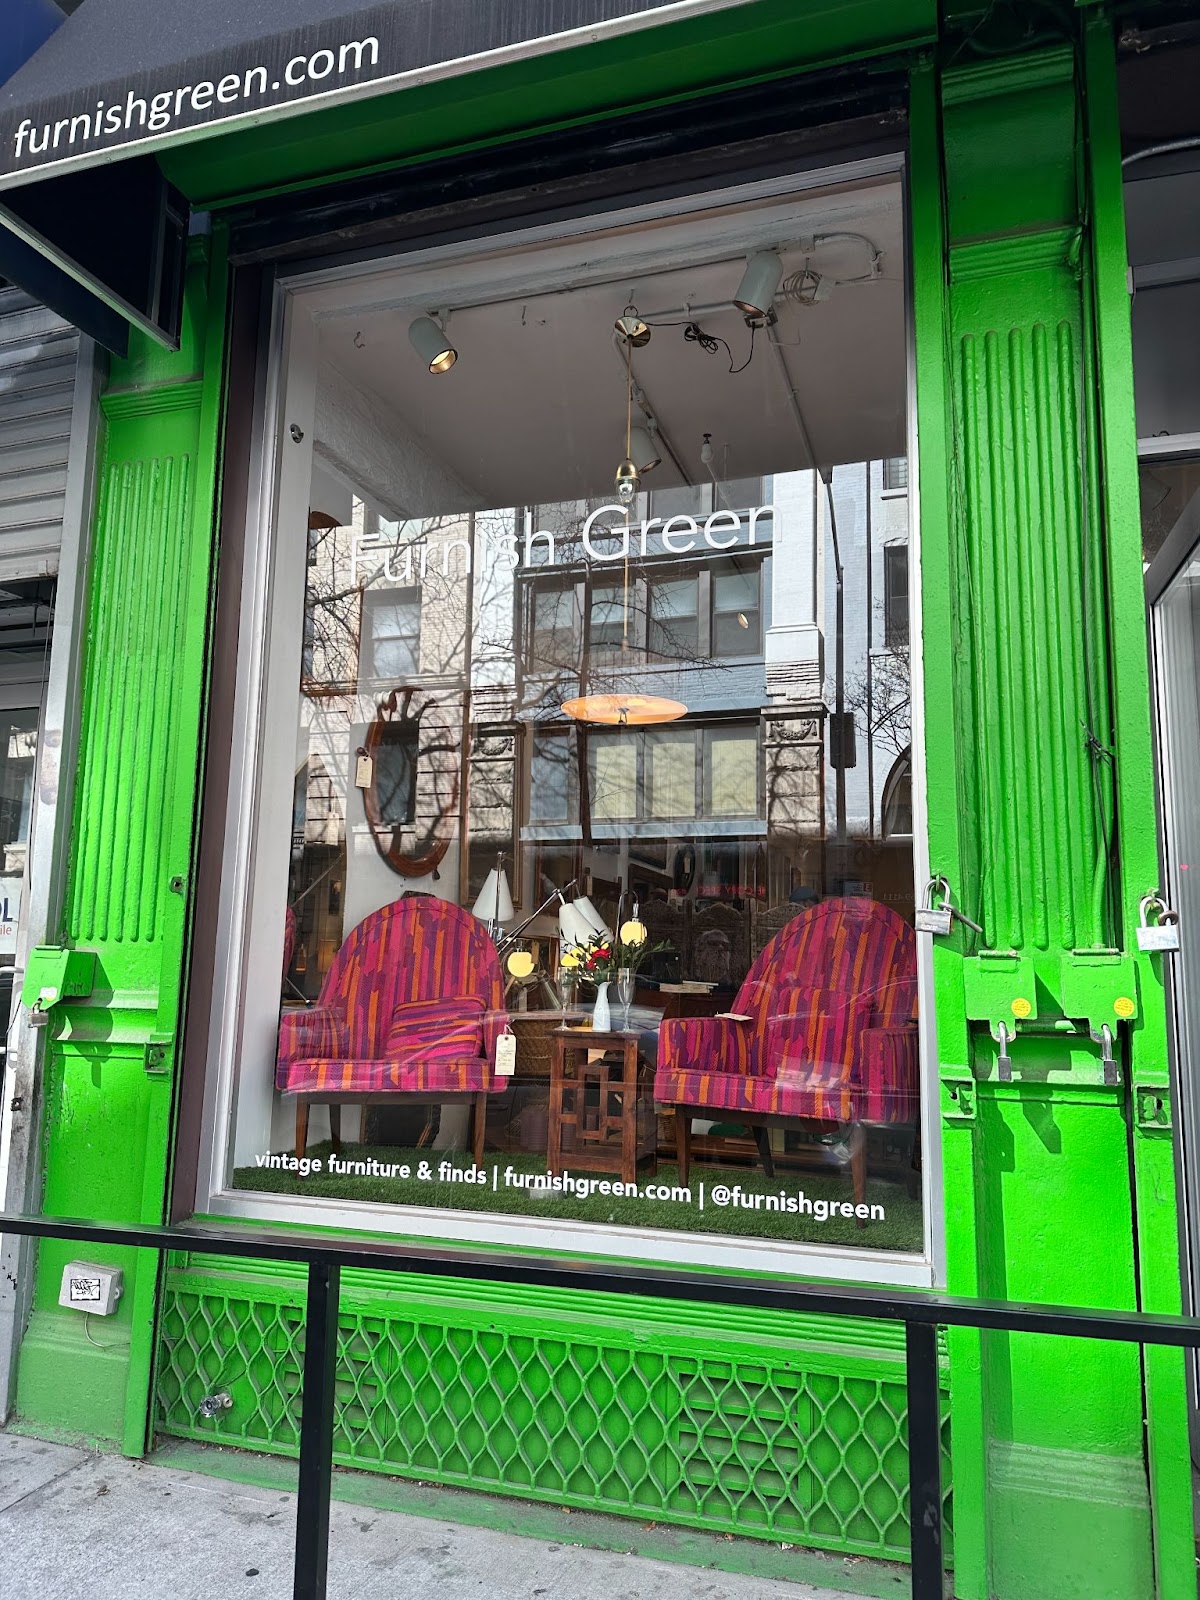 Furnish Green storefront in Chelsea